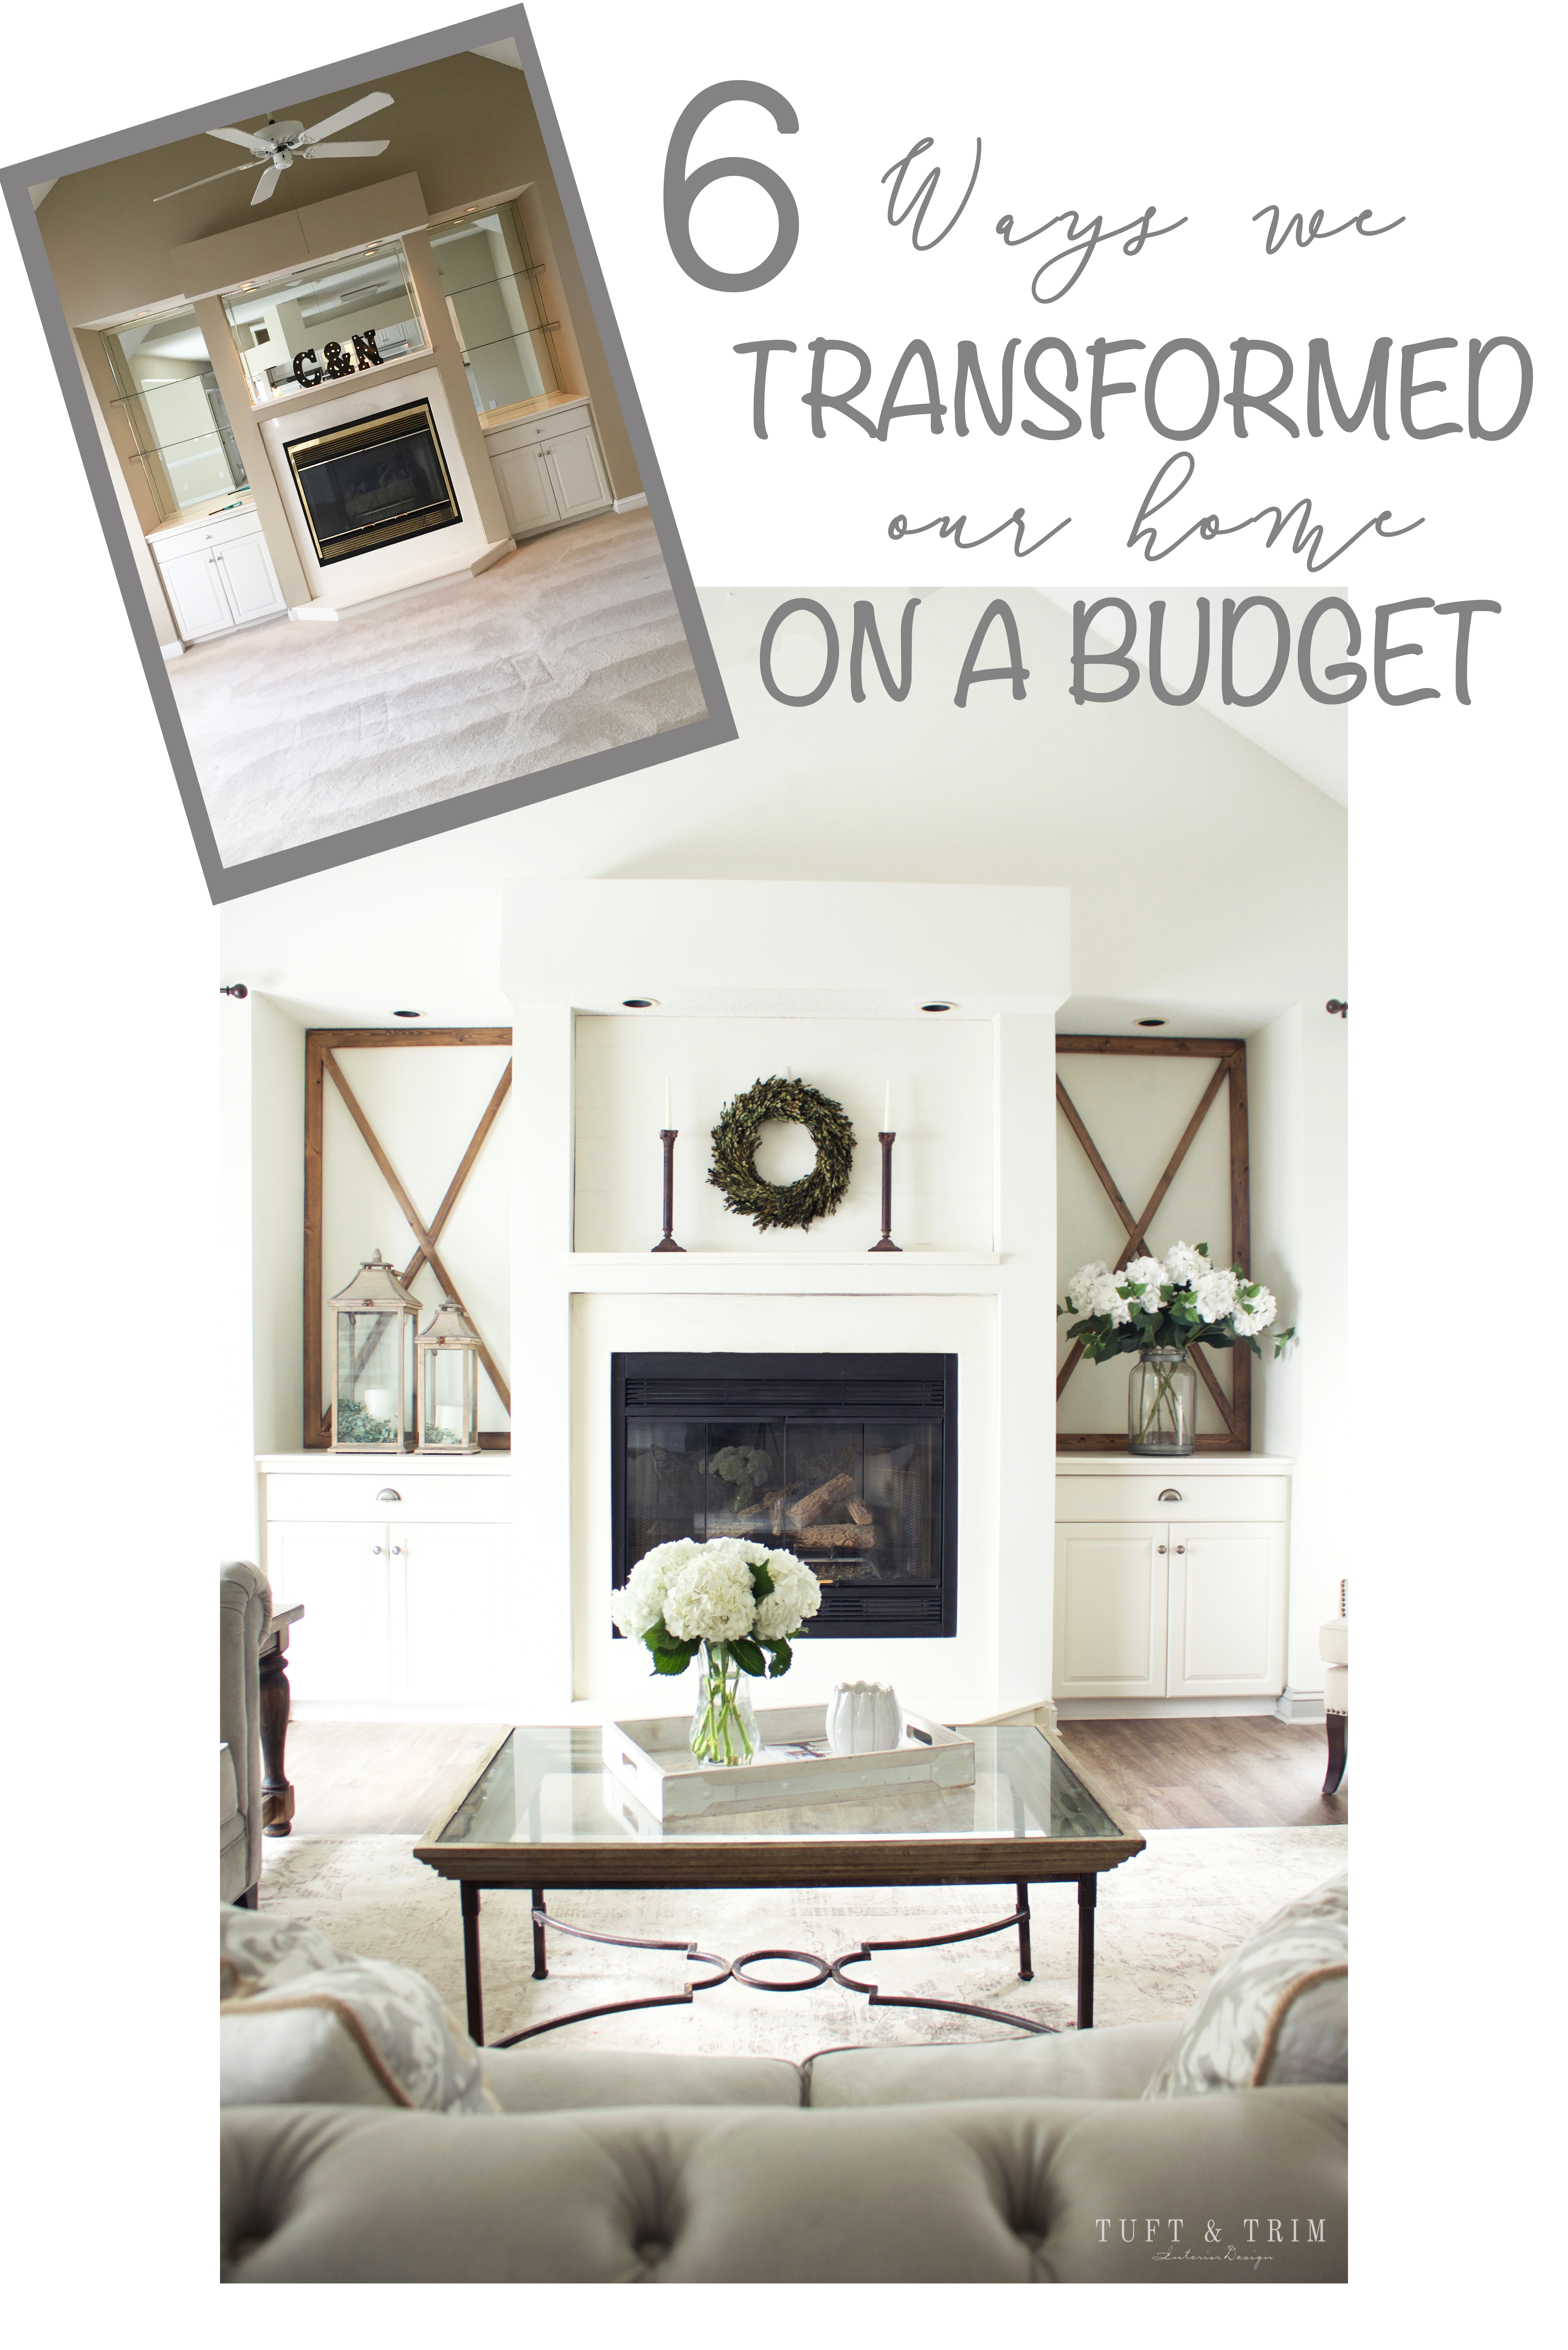 6 Ways we transformed our home on a budget